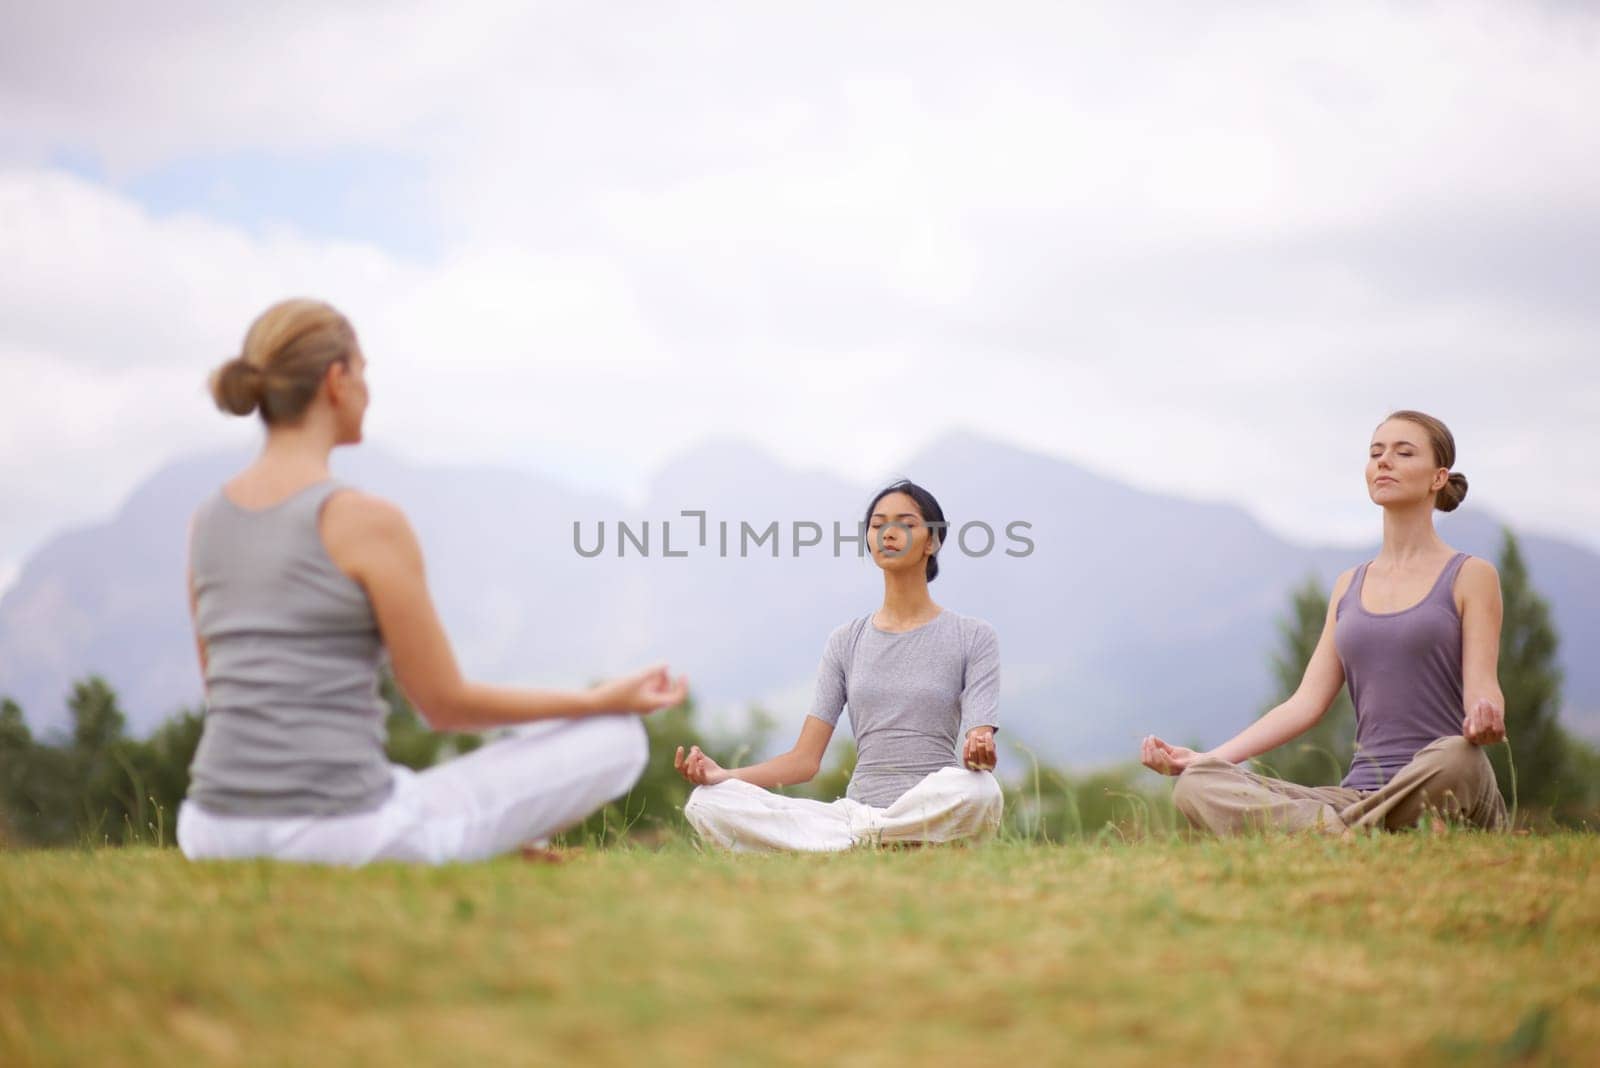 Lotus, instructor and meditation outdoor for yoga, healthy body and mindfulness exercise to relax. Peace, group and calm women in padmasana in nature for balance, spirituality or breathing together by YuriArcurs